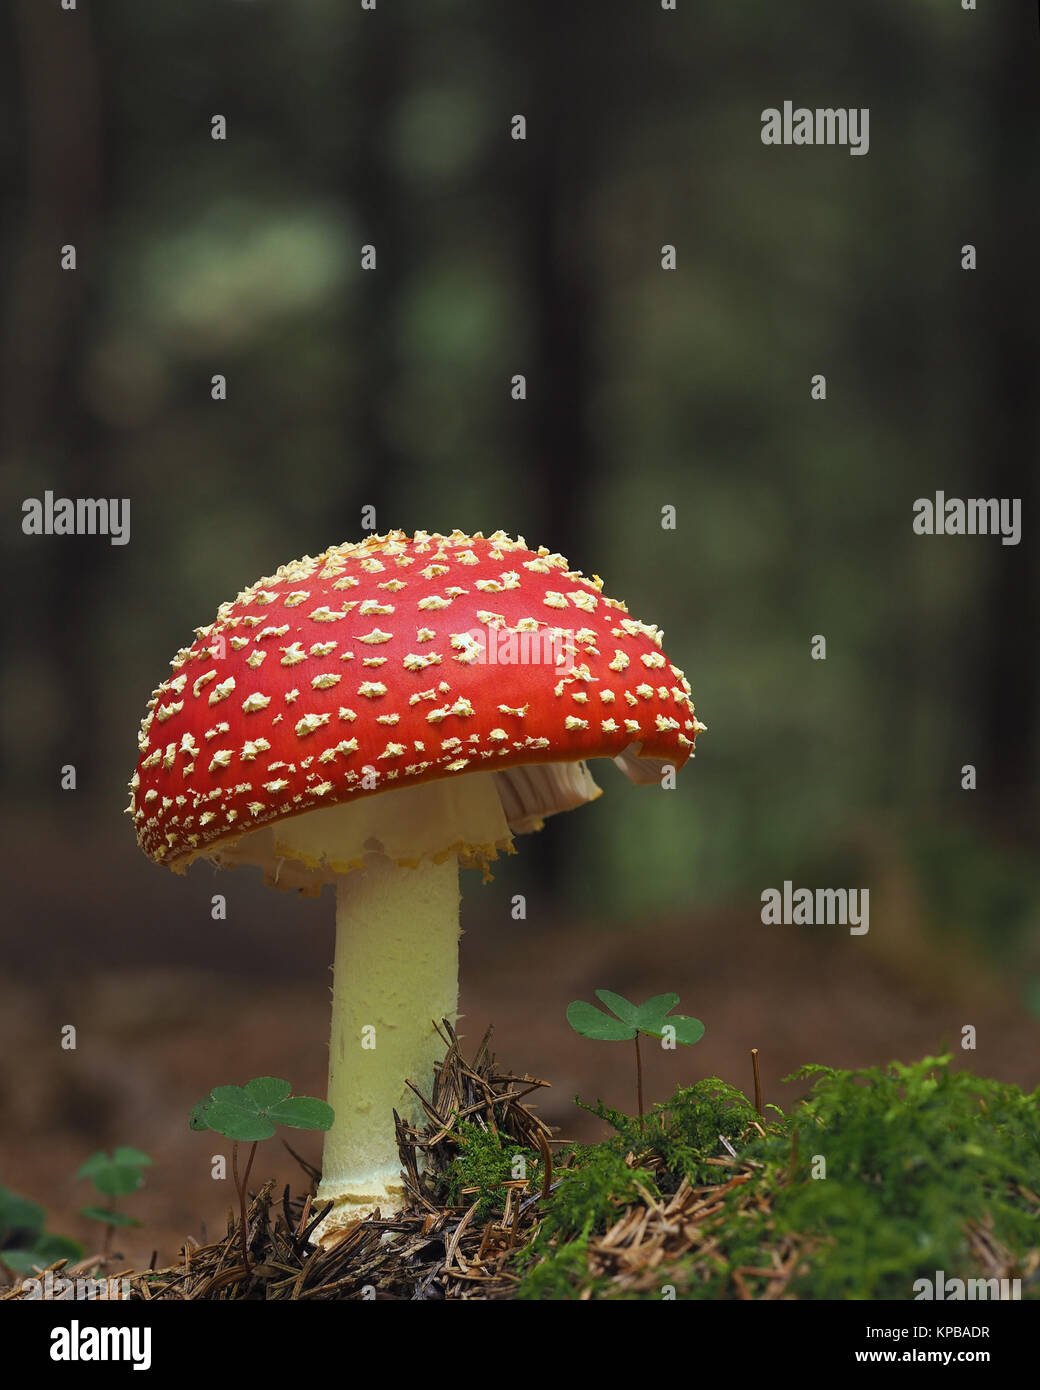 Agaric Fly champignons (Amanita muscaria) croissant en forêt mixte. Cahir, Tipperary, Irlande. Banque D'Images